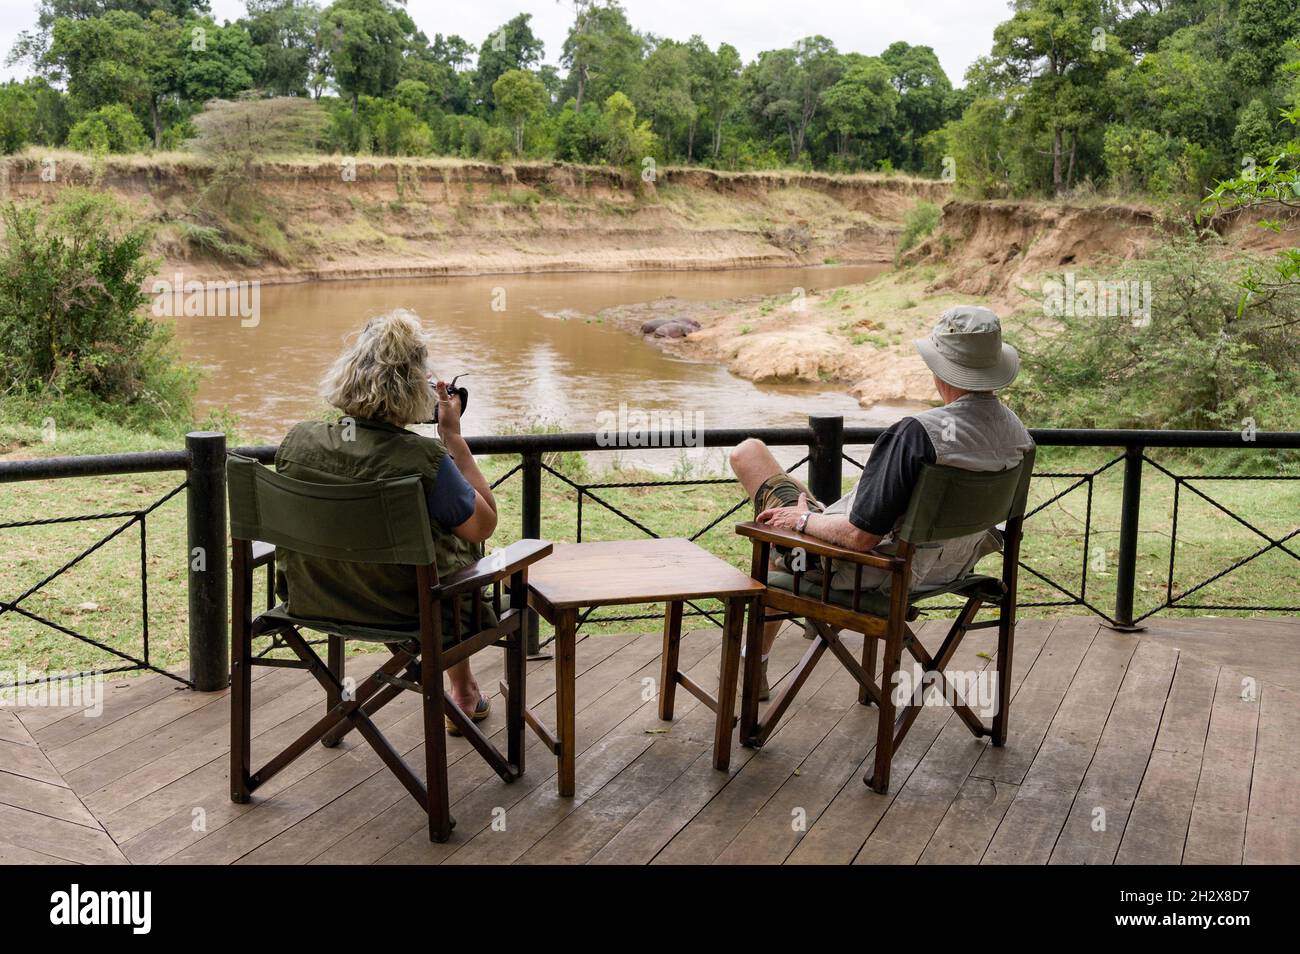 Caucasian couple seated on viewing area at Governors camp watching hippos by the Mara river in distance, Masai Mara, Kenya Stock Photo